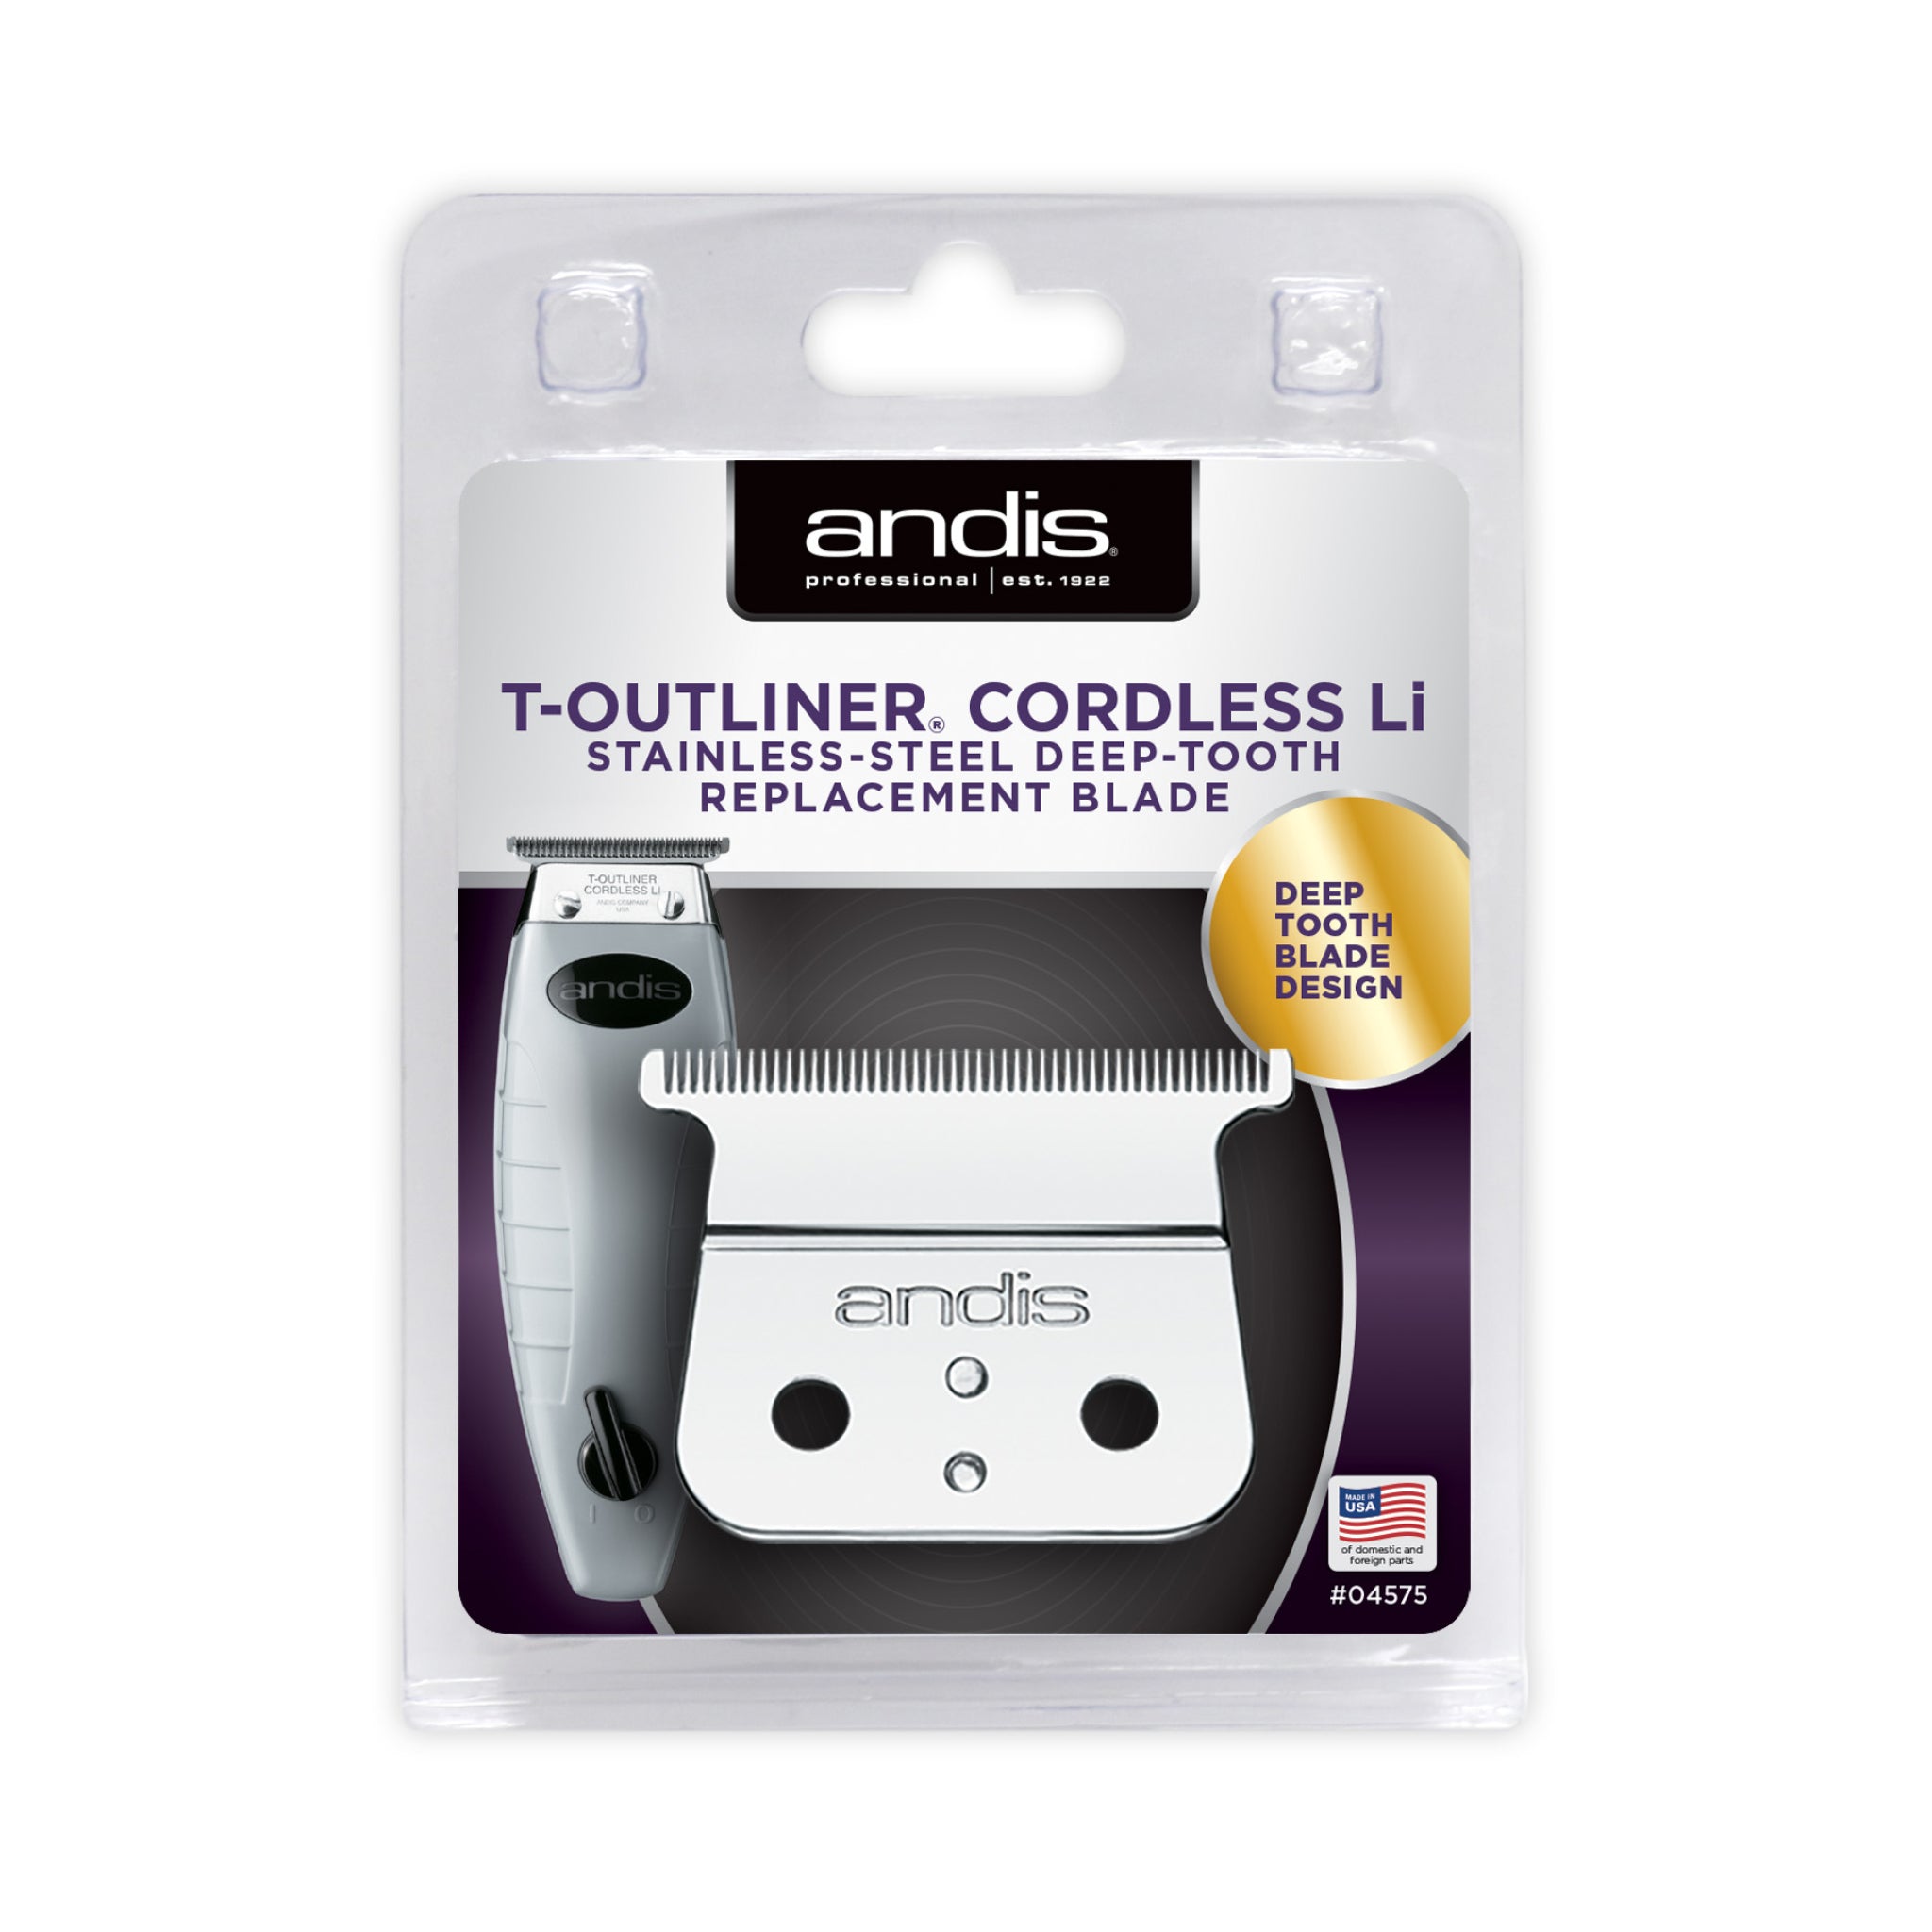 Andis T-Outliner Cordless Li Stainless Steel Deep Tooth Replacement Blade